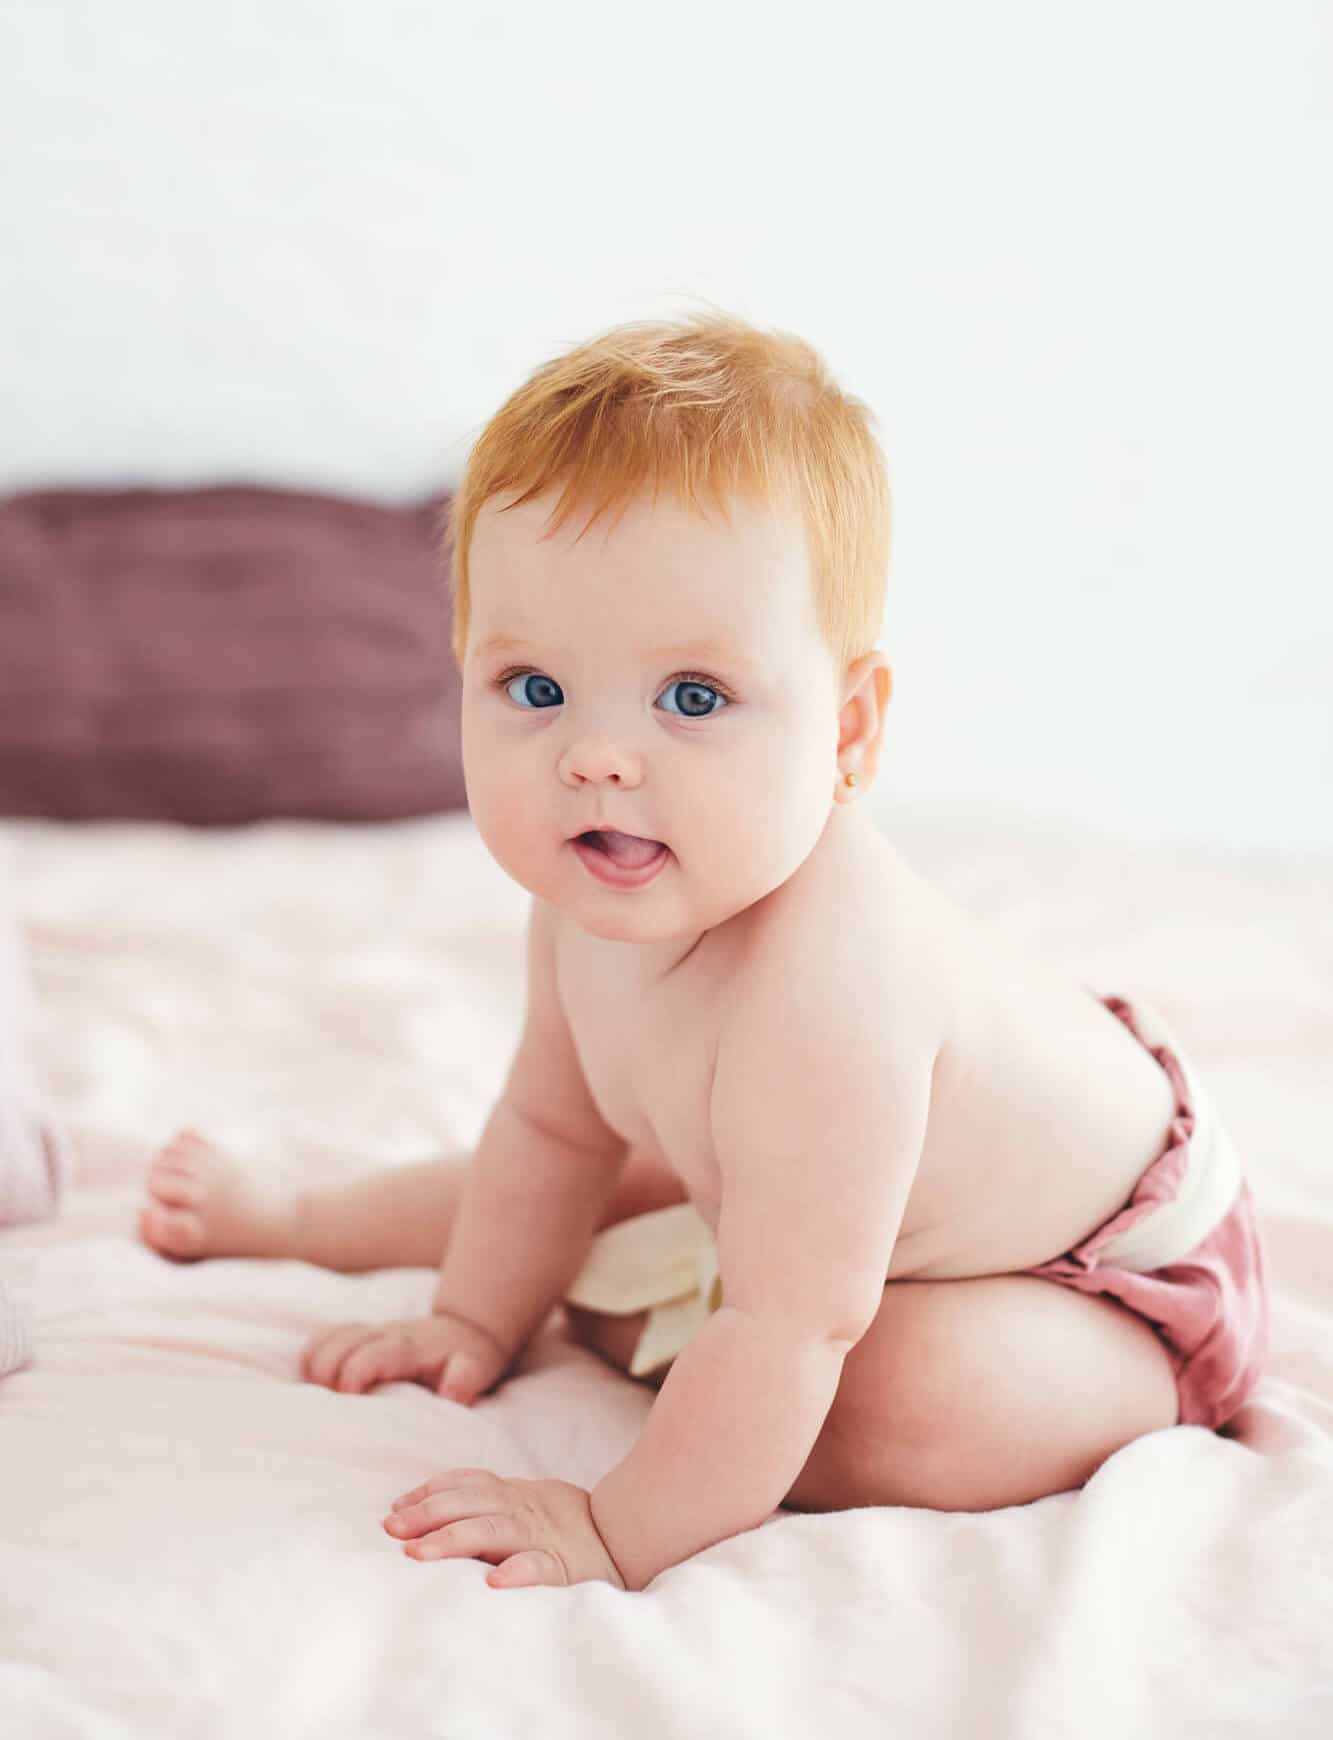 redhead baby girl sitting on bed